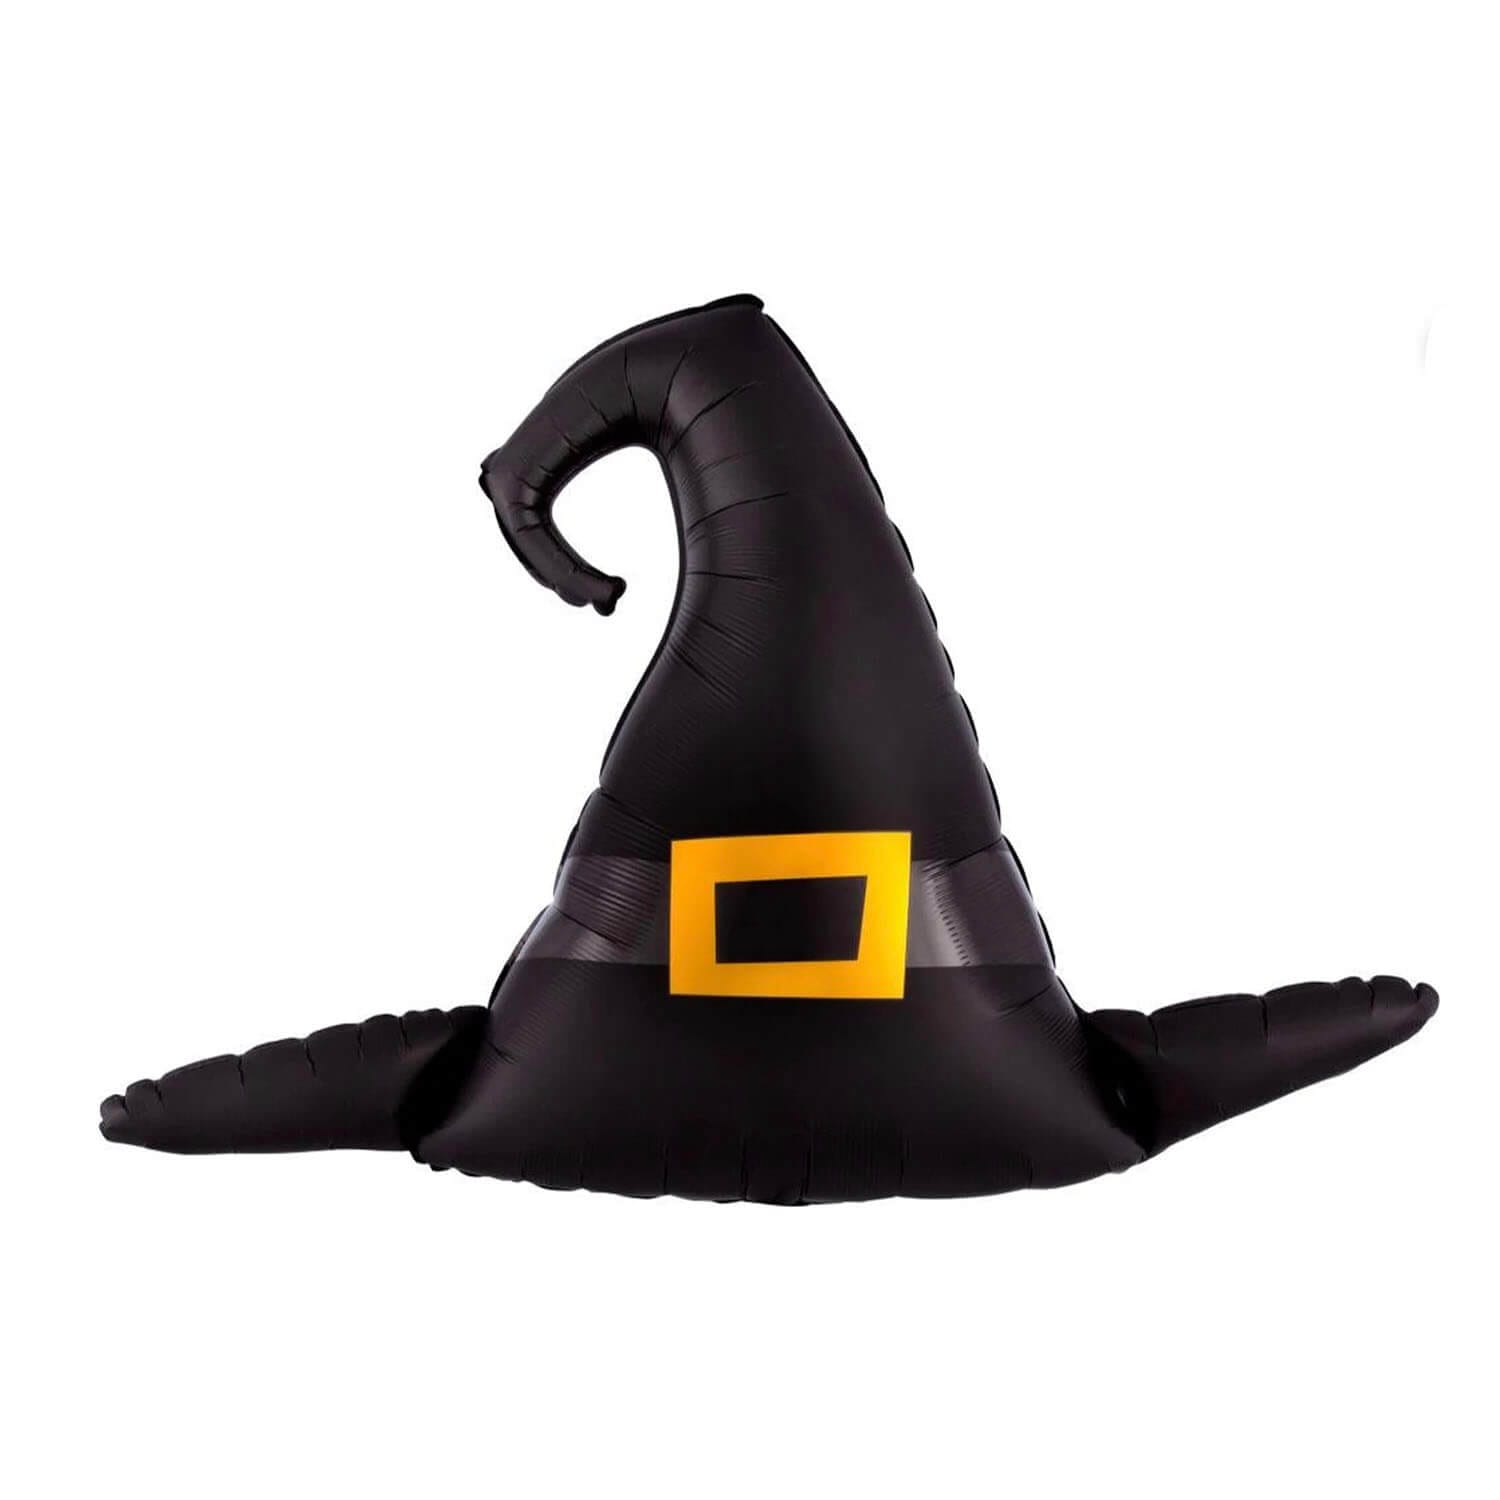 Oversized black satin witch hat mylar balloon with gold buckle for Halloween parties from Just Peachy.